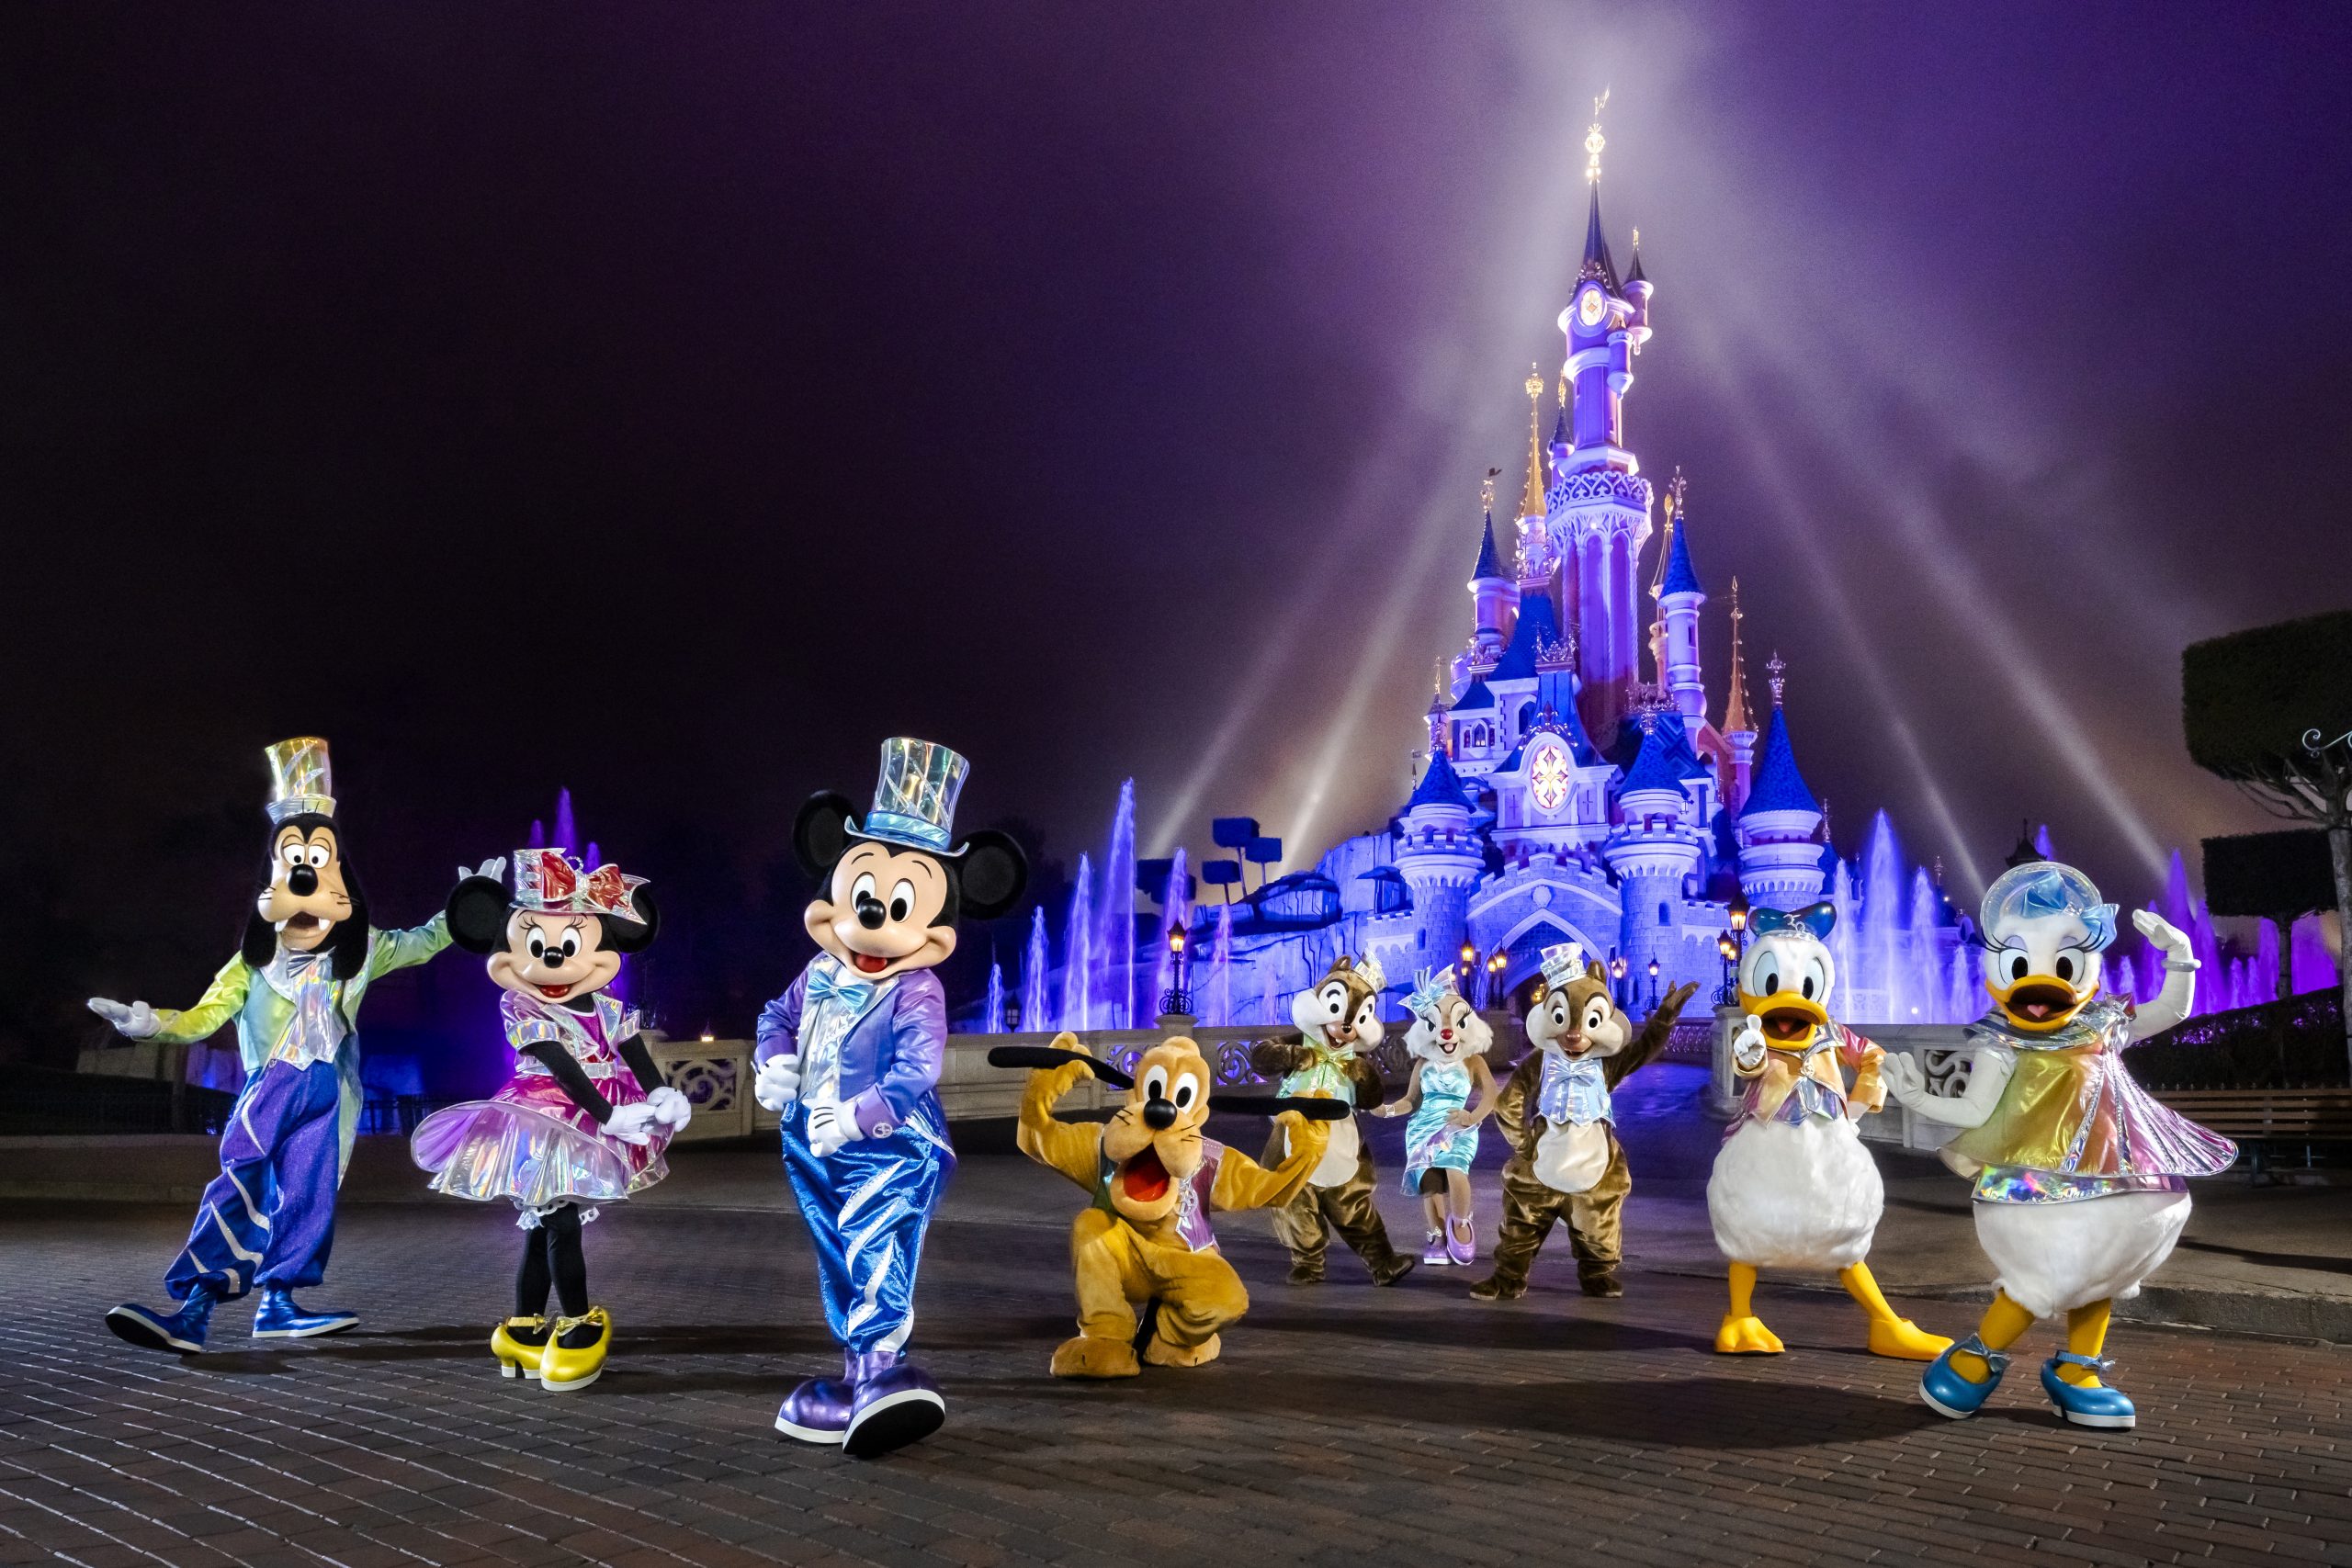 As of March 6, 2022, Disneyland Paris will celebrate its 30th Anniversary!